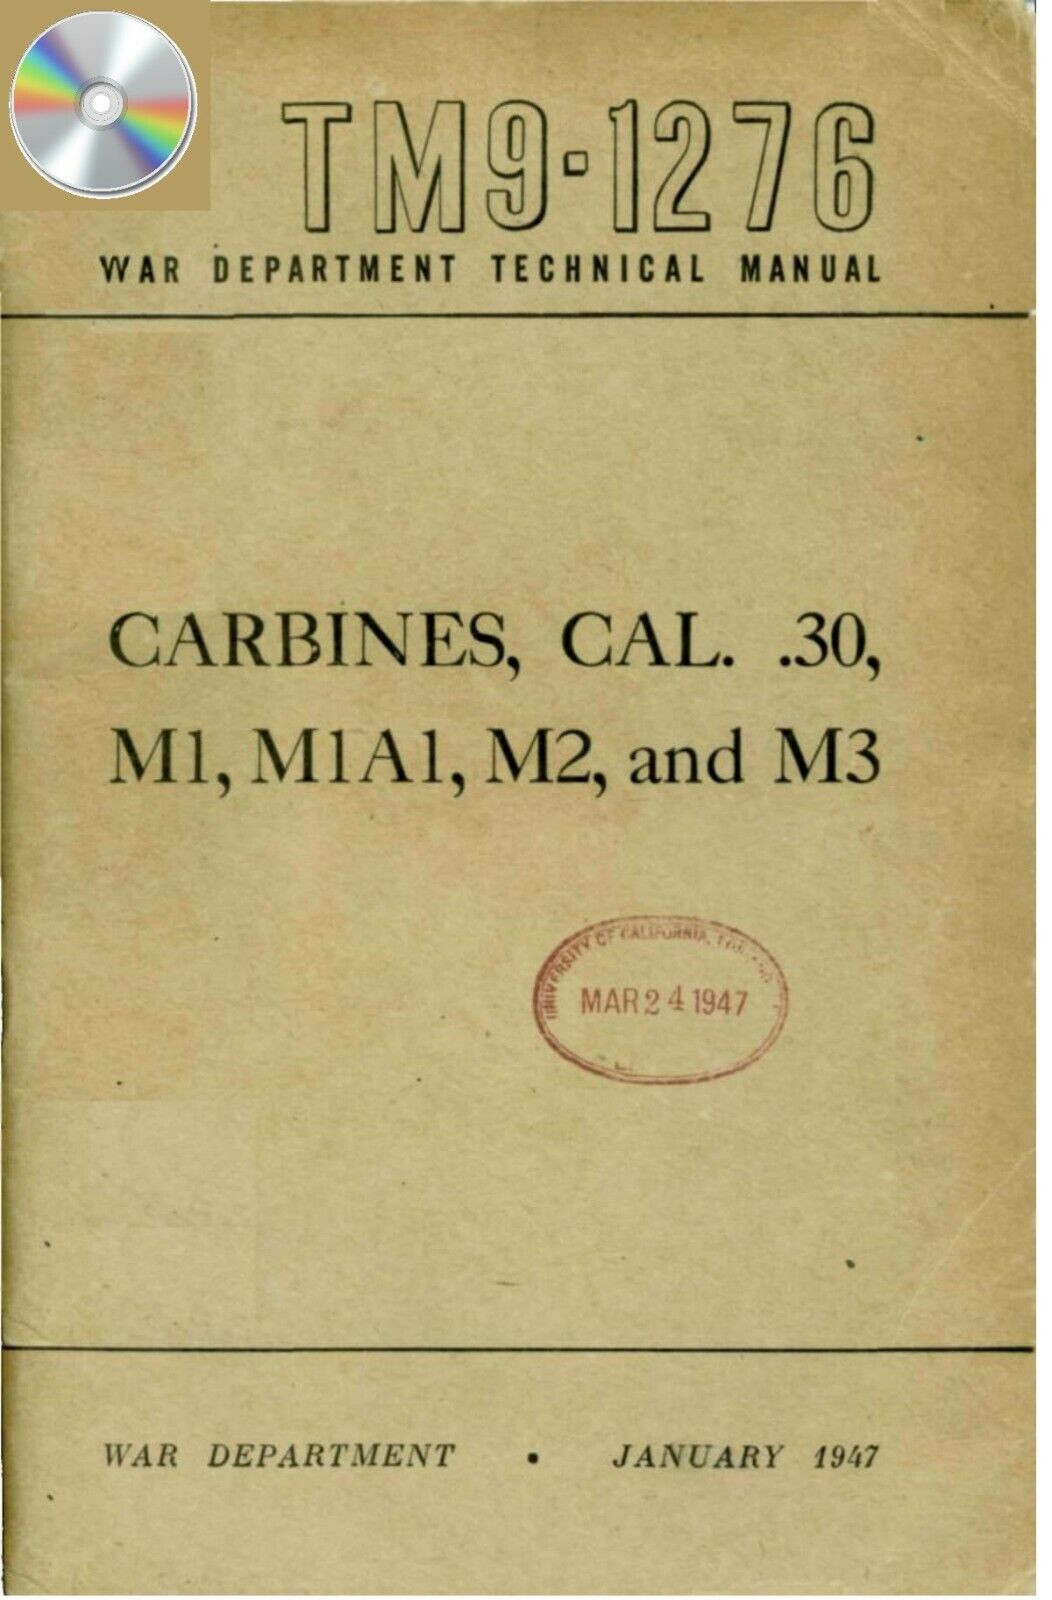 1947 CARBINES CAL. .30, M1, M1A1, M2, and M3 TM 9-1276 Technical Manual on CD/SD